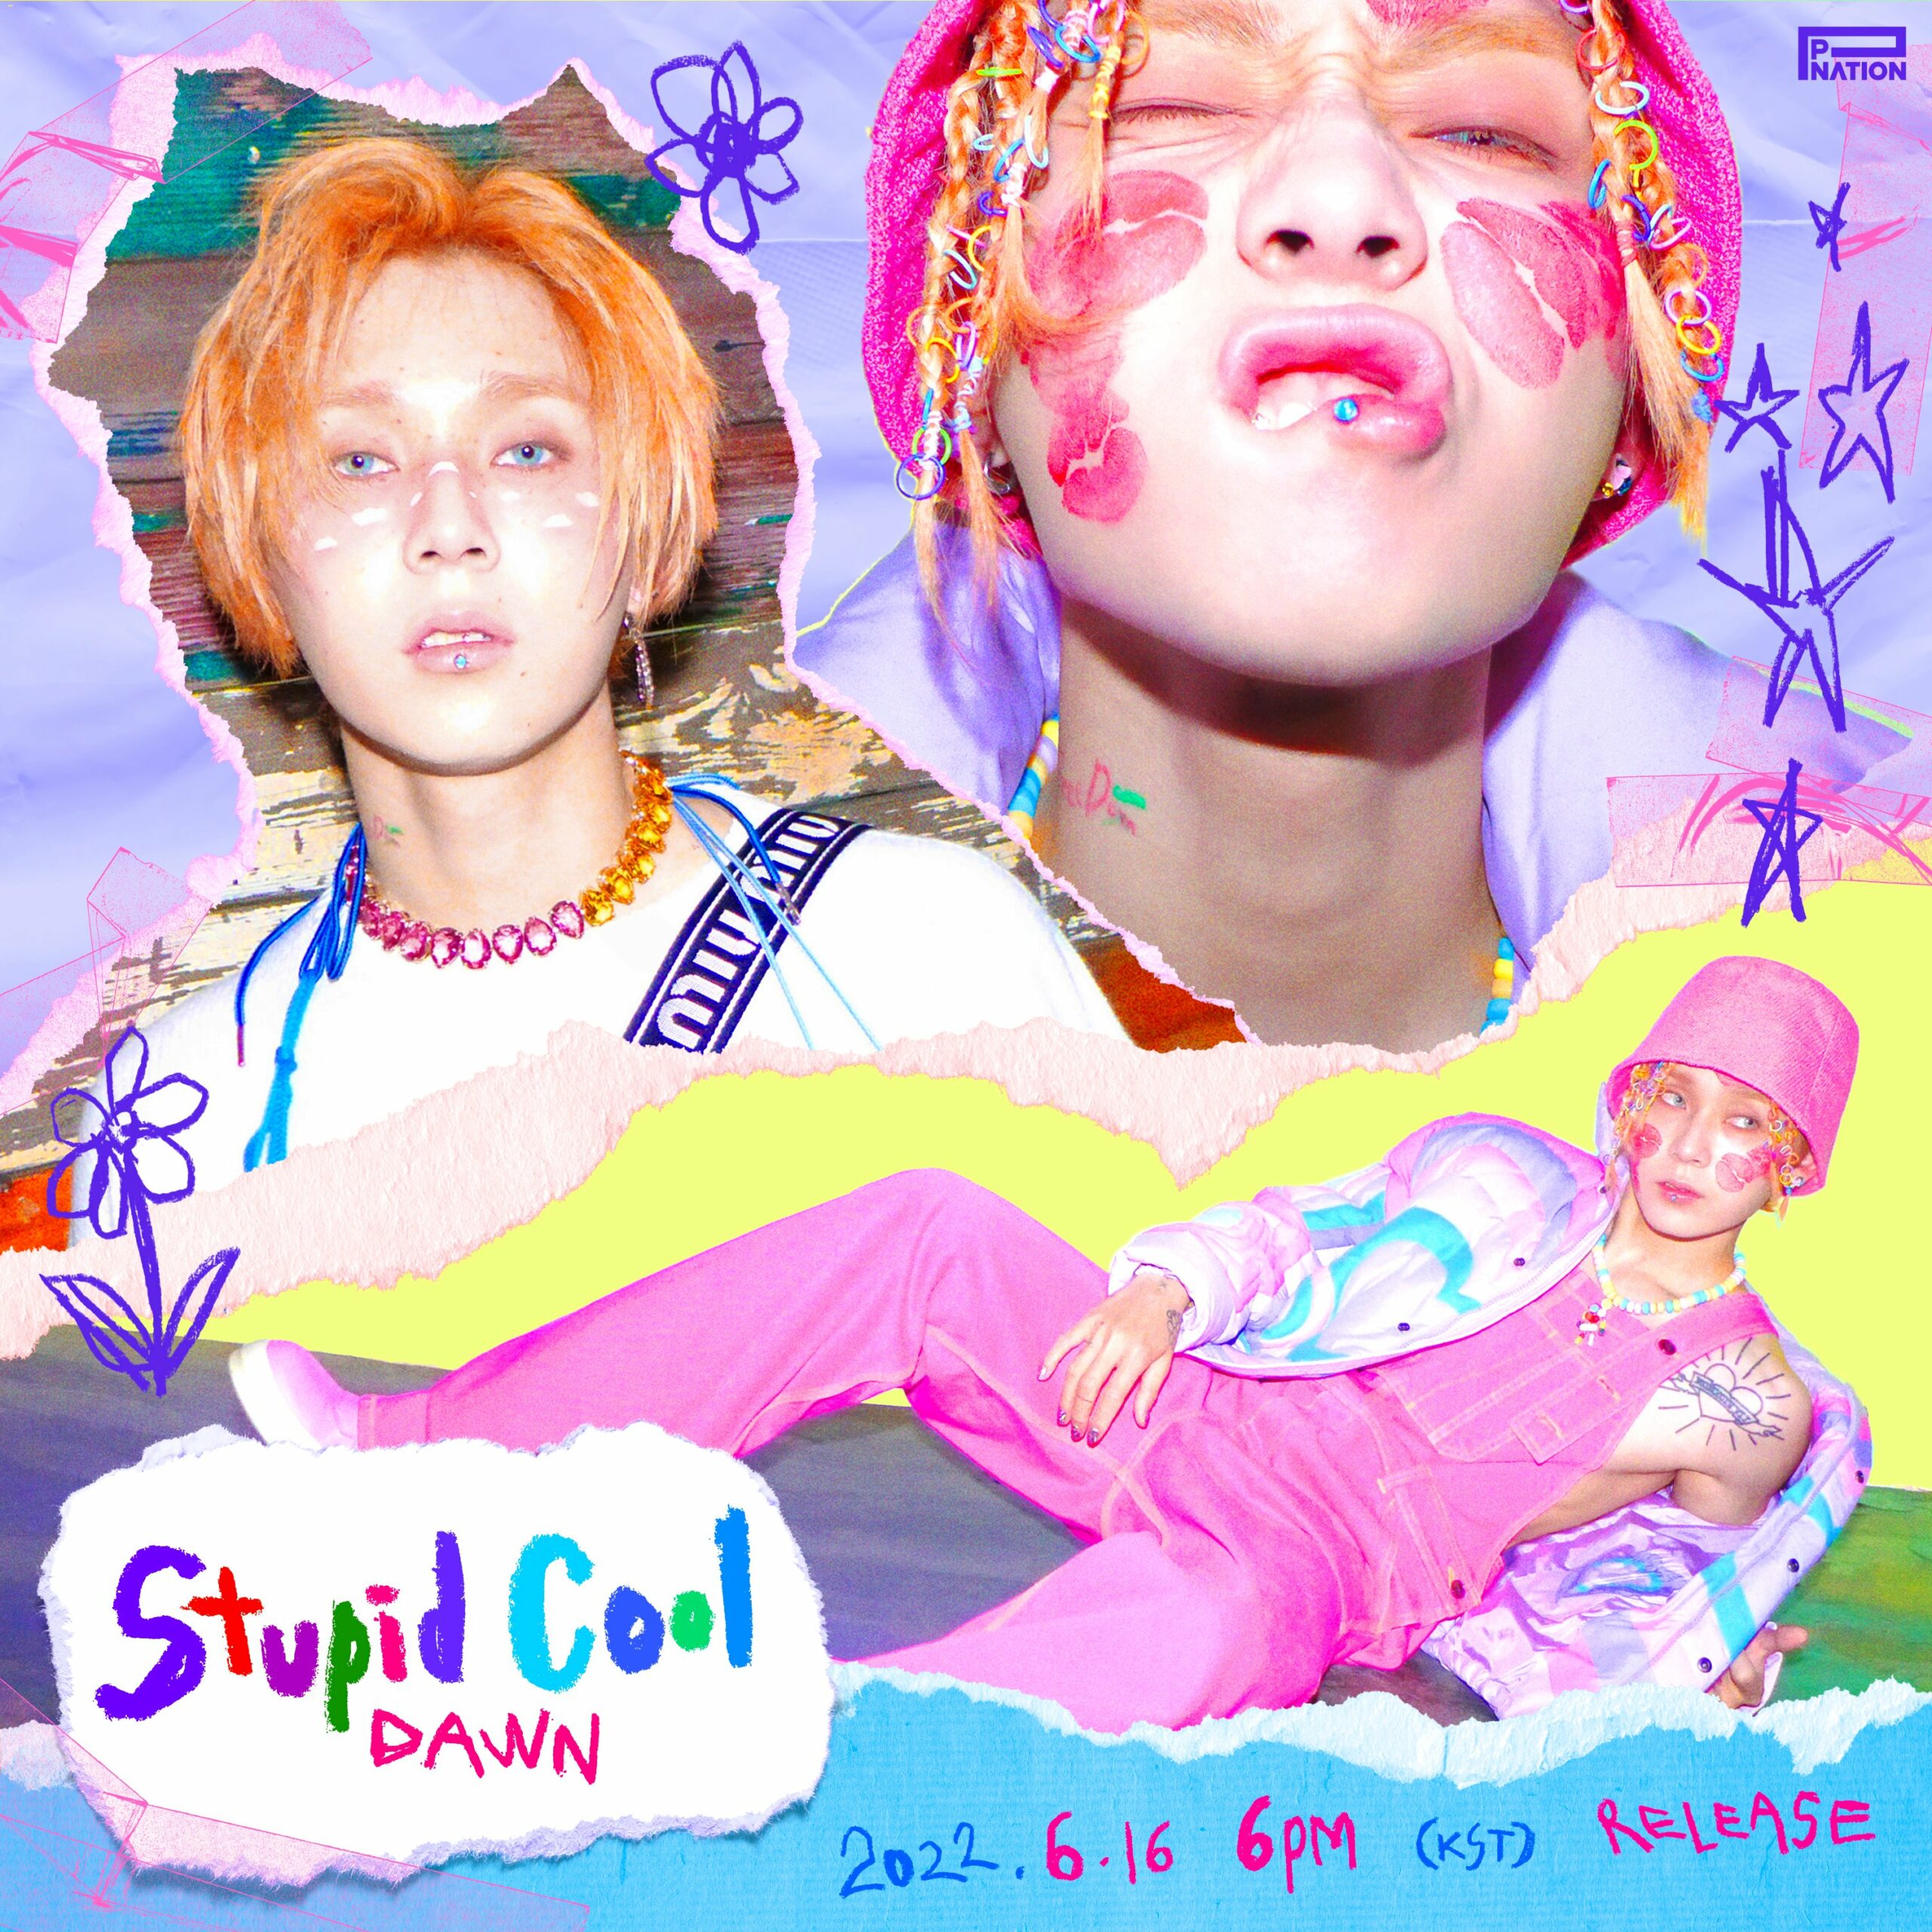 Dawn returns with a charming and playful video for ‘Stupid Cool’